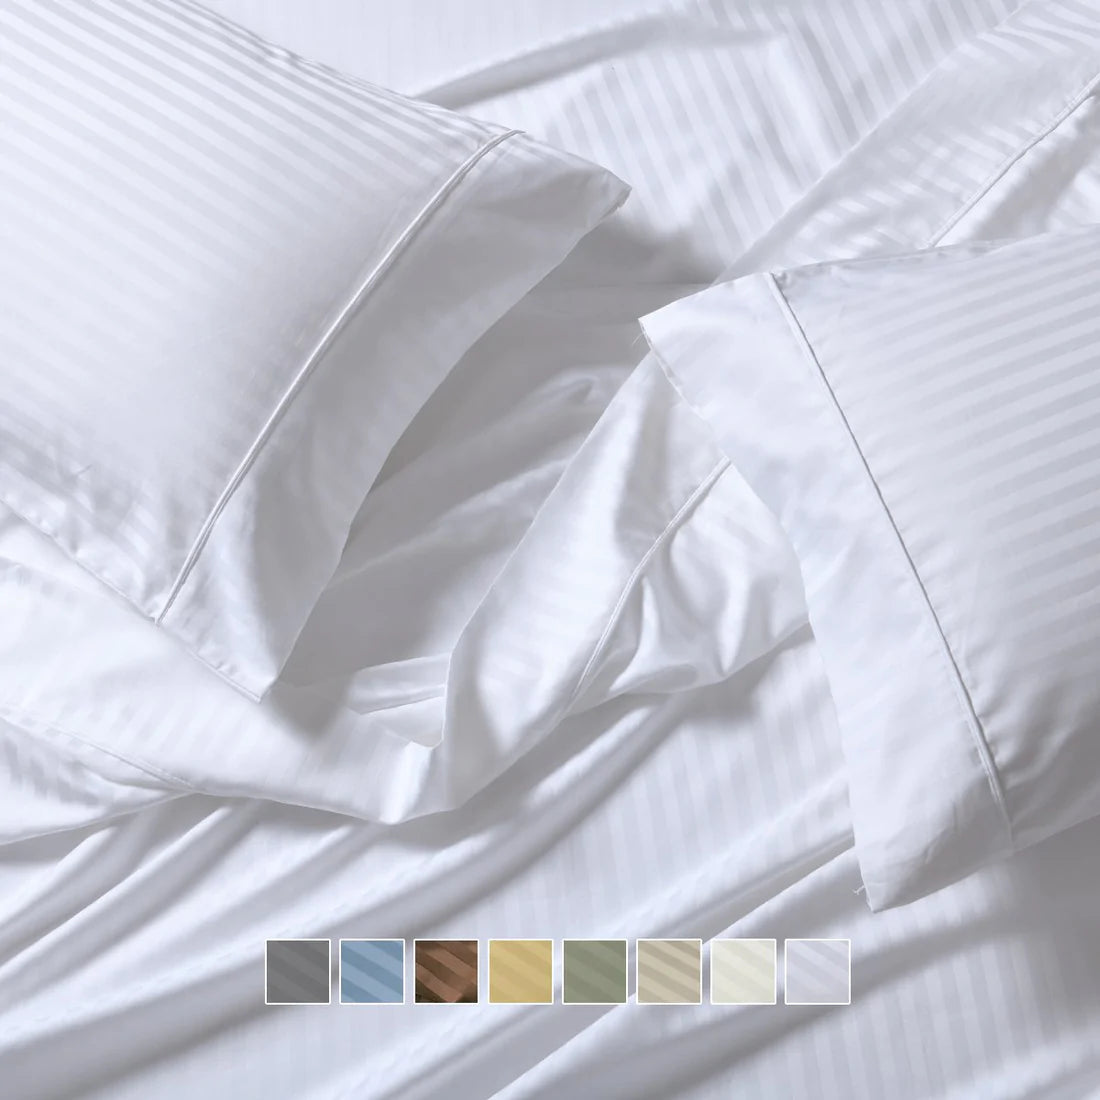 Buy Egyptian Cotton White Sheet Set 1200 Thread Count in all sizes at- Egyptianhomelinens.com